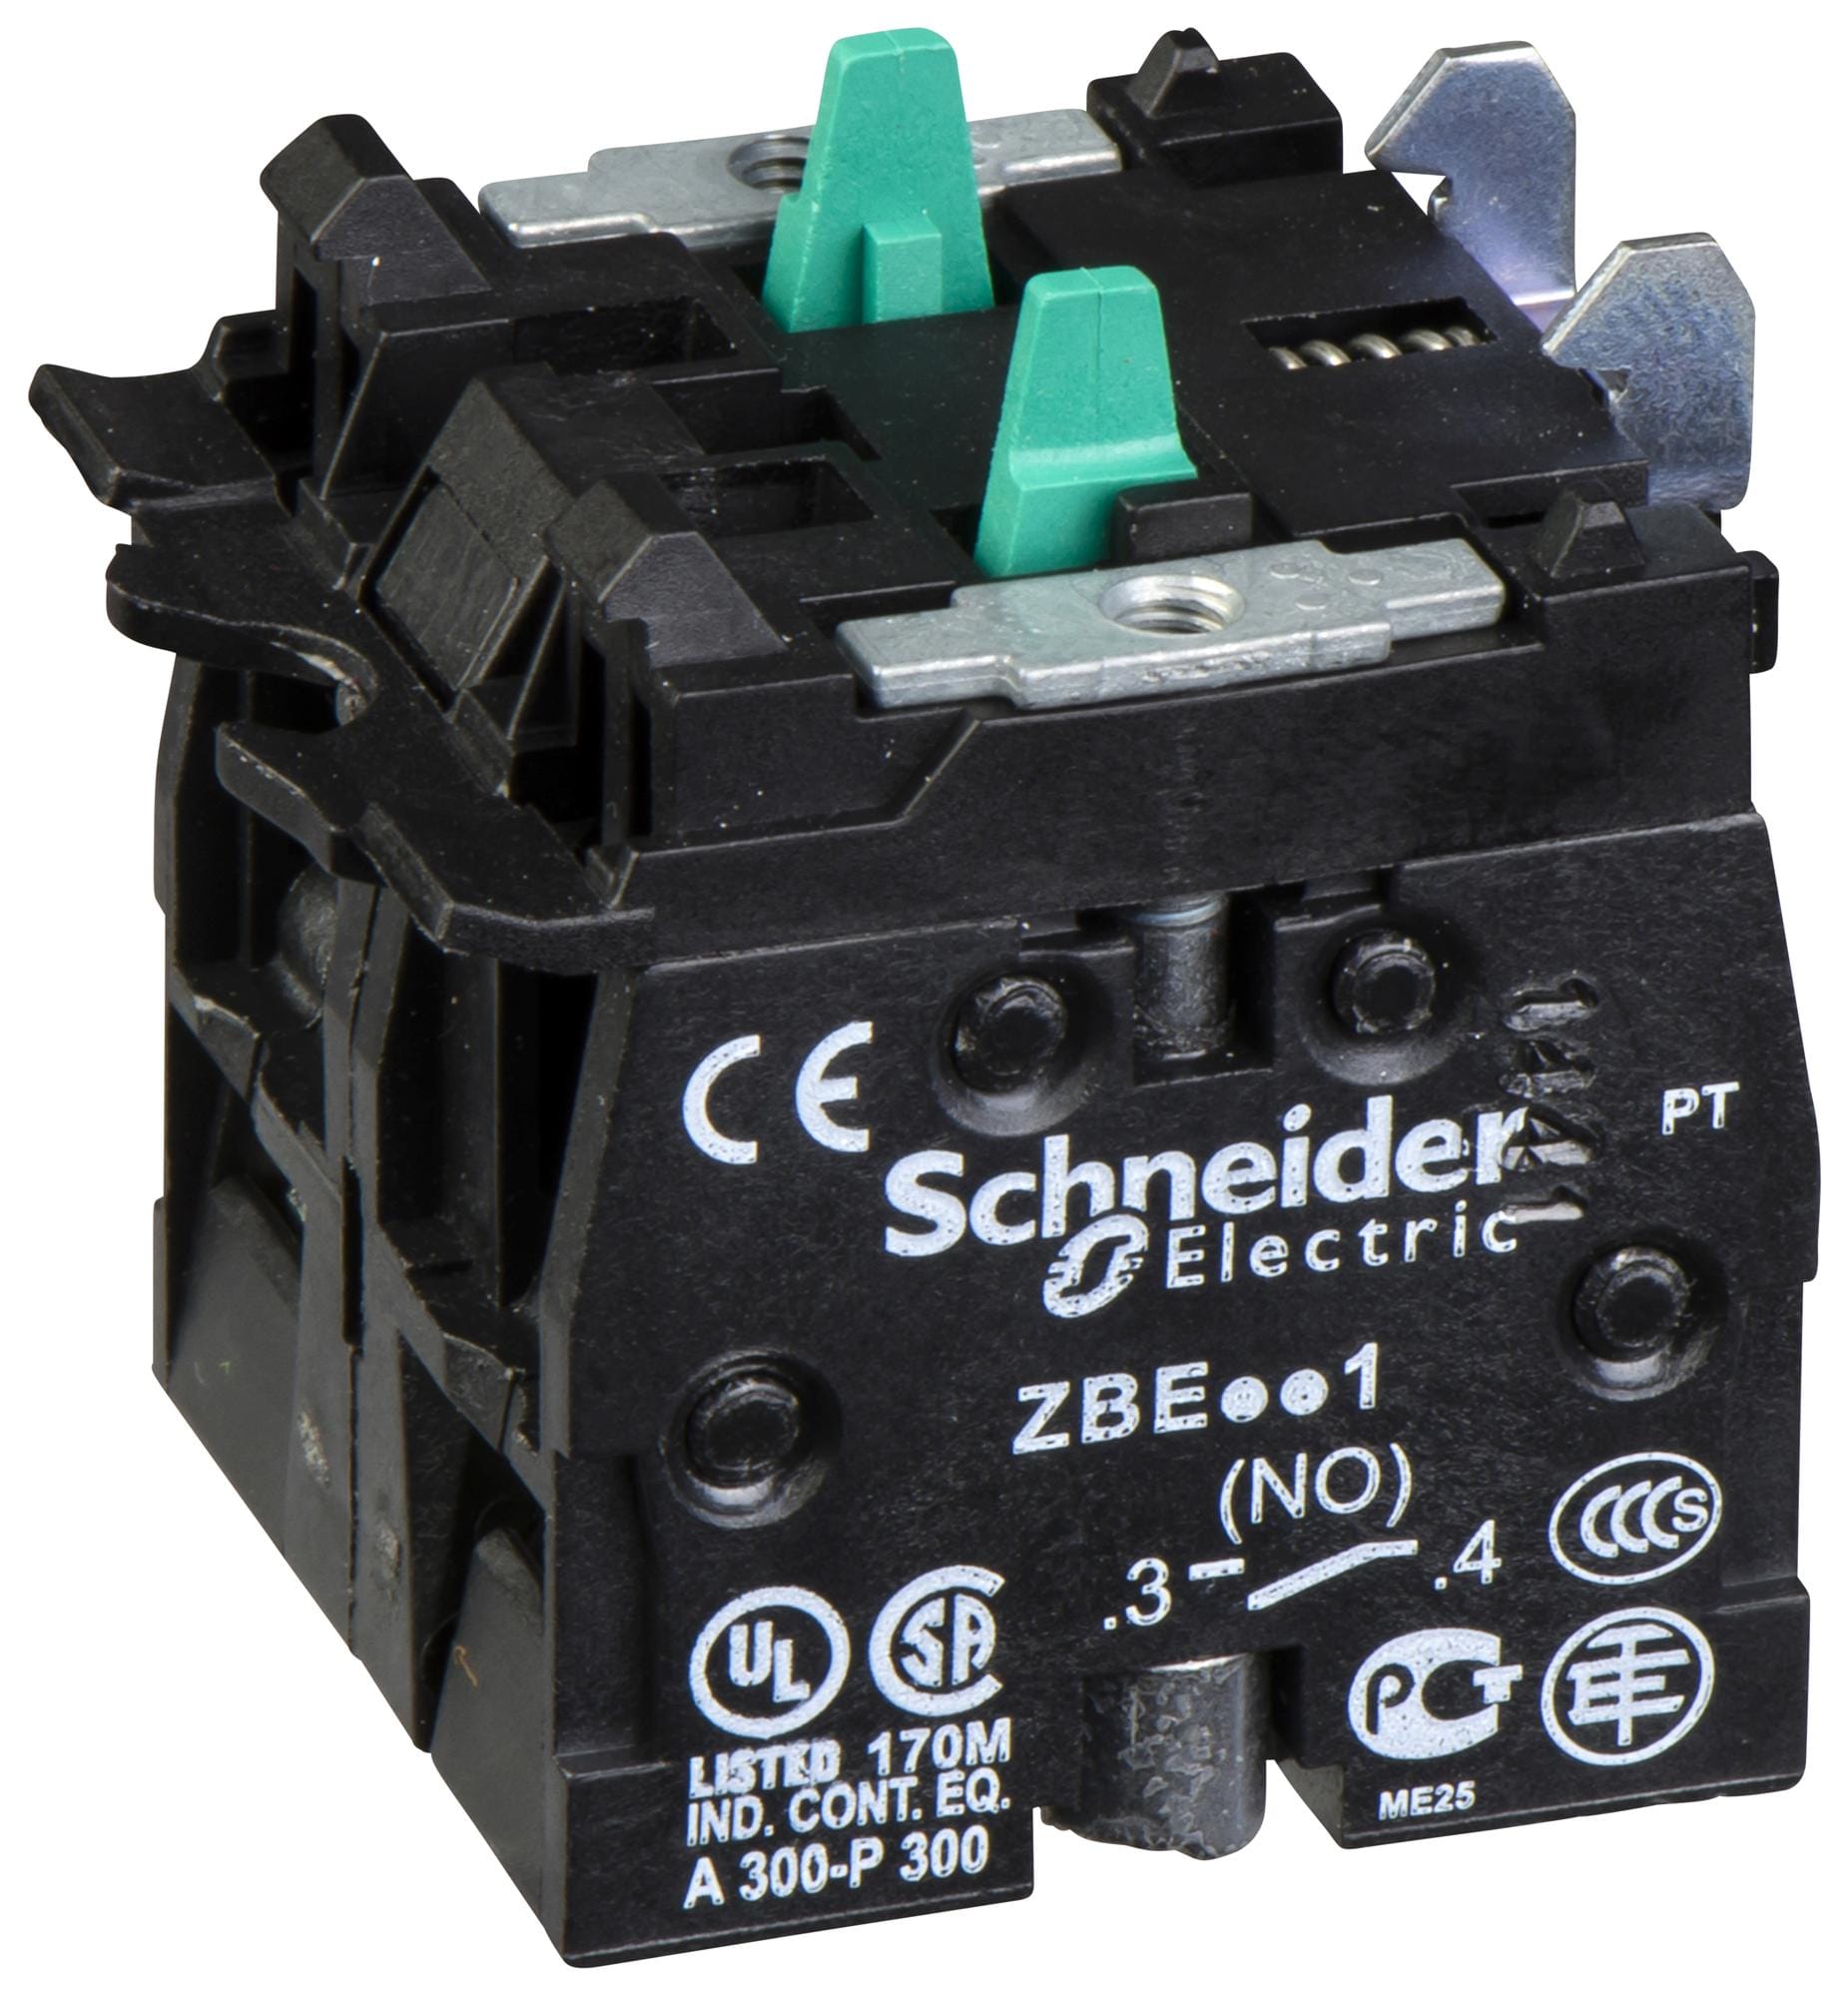 SCHNEIDER ELECTRIC Contact Blocks ZBE503 CONTACT BLOCK, 1.1A, 125VAC, CLAMP SCHNEIDER ELECTRIC 3114924 ZBE503